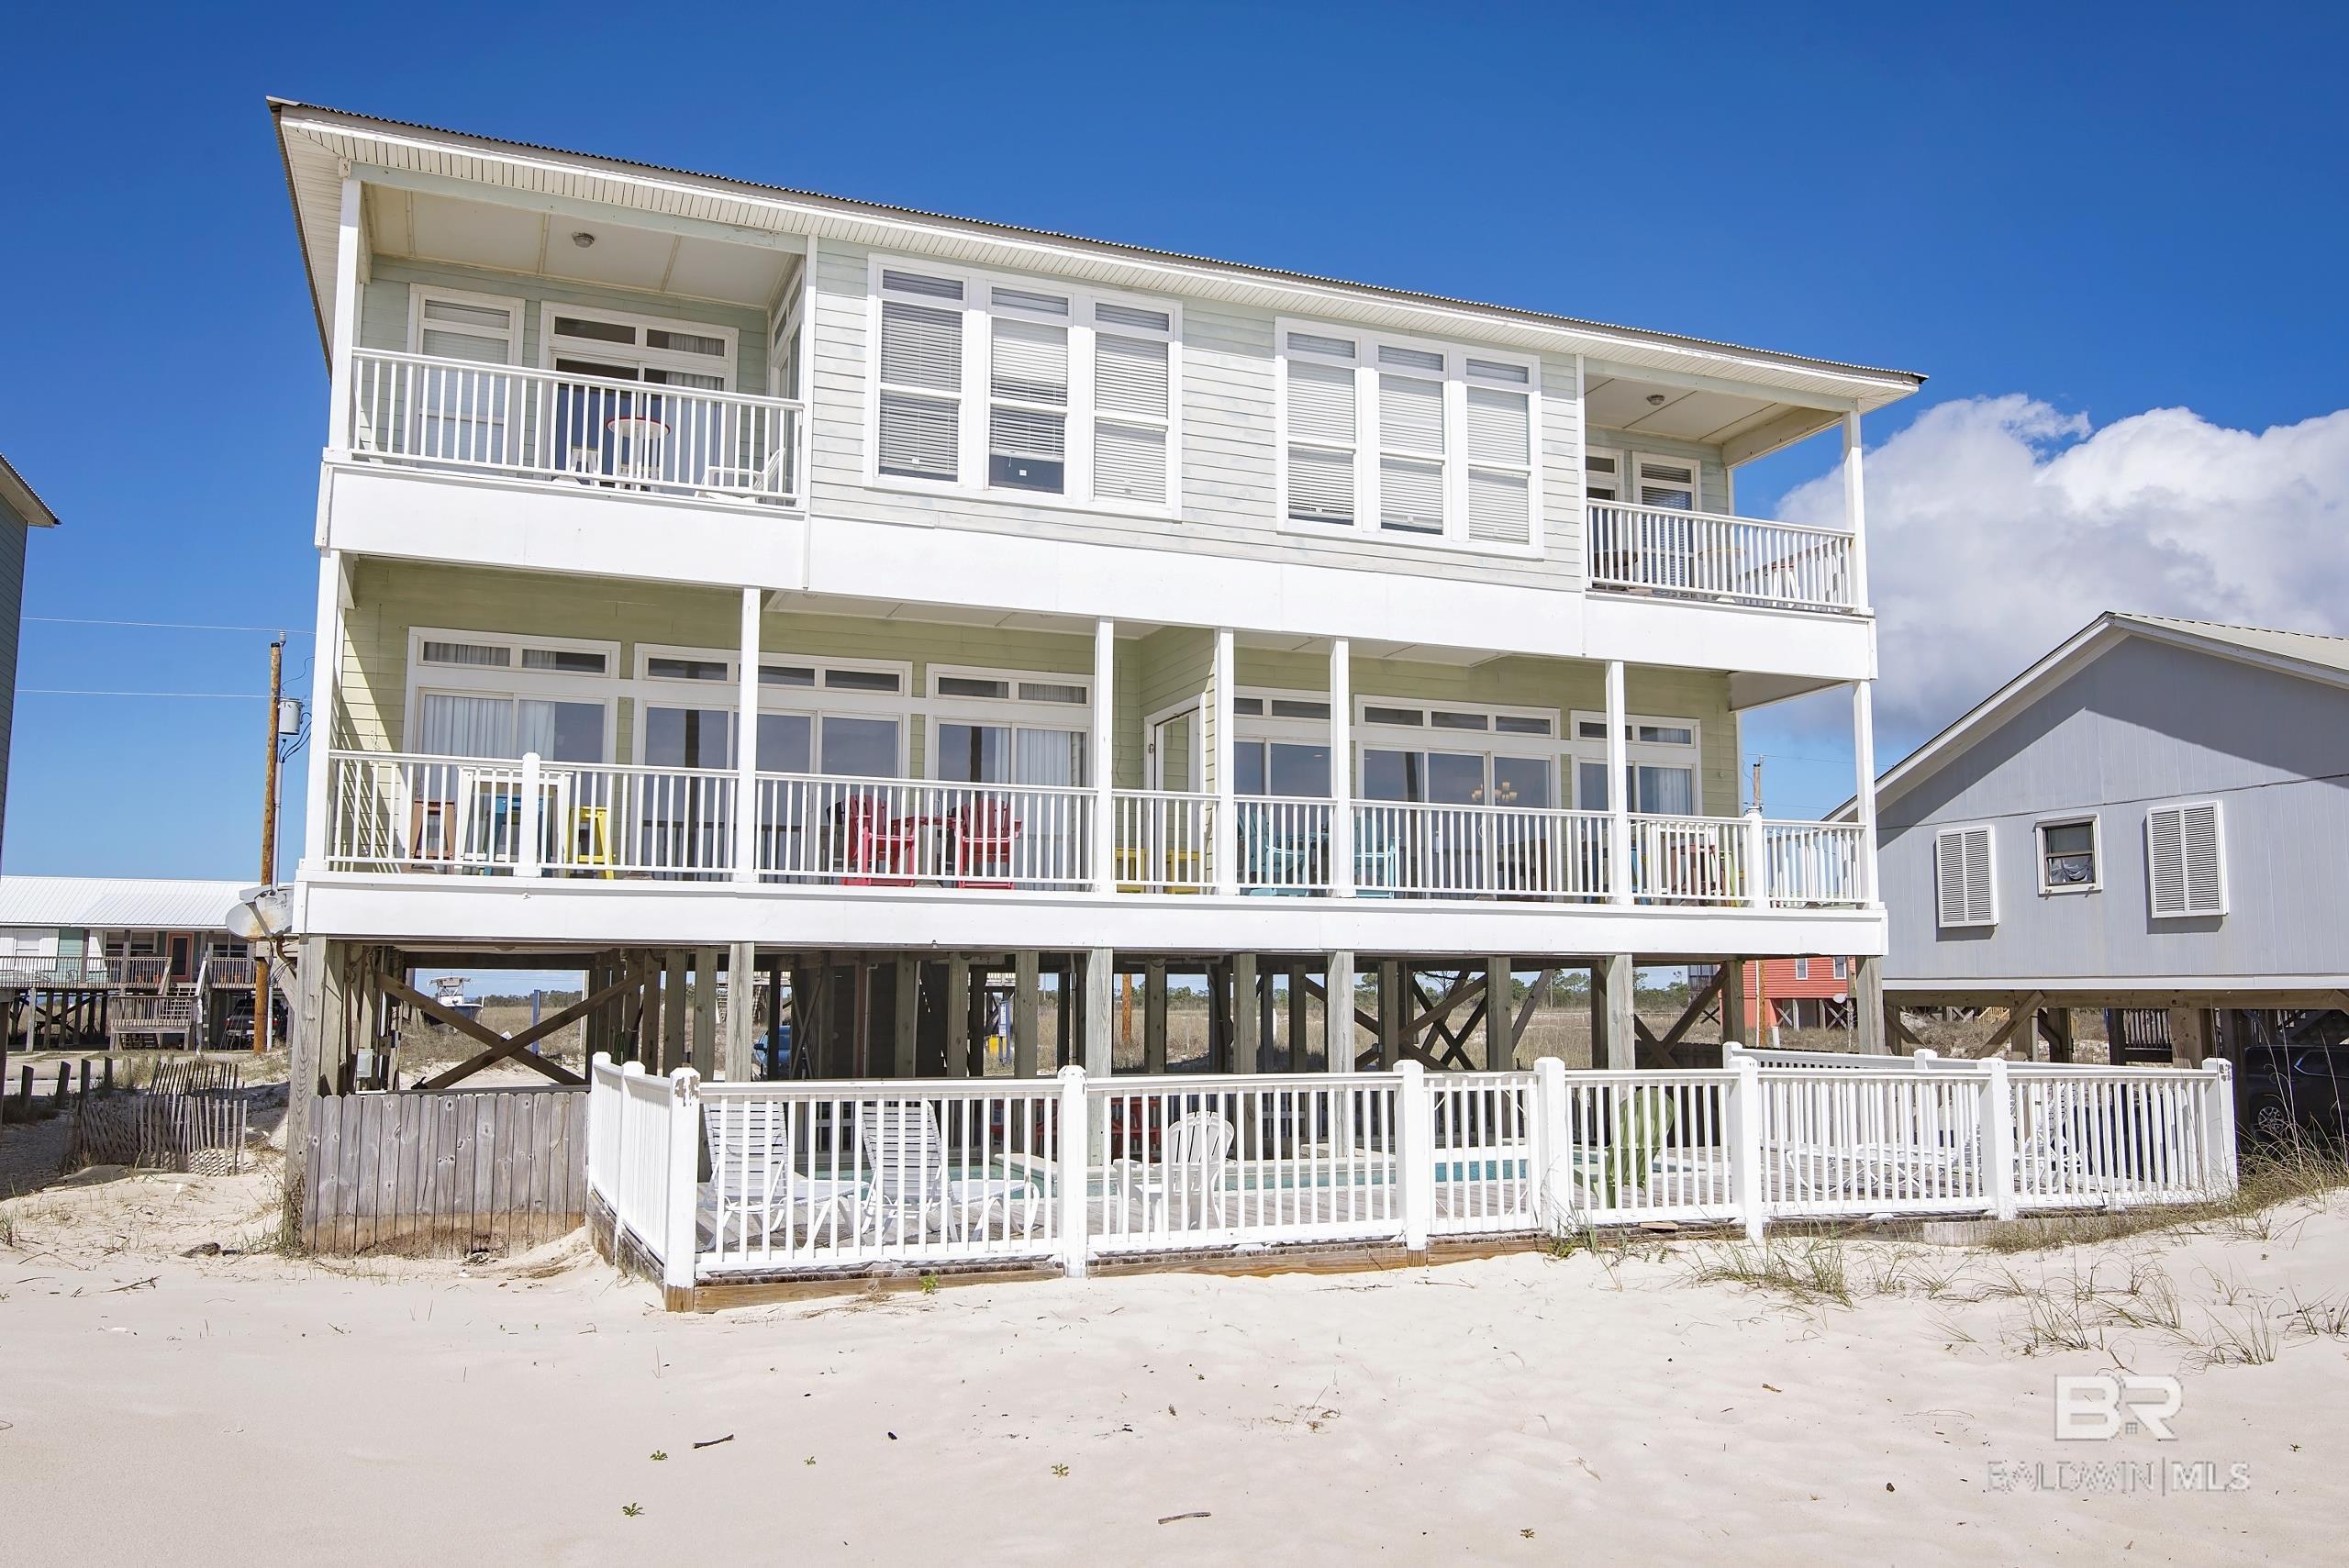 If you are looking for a vacation home for large families or if you're looking for an investment property, look no further than Big Breezy on Fort Morgan.  Big Breezy is a large 10 bedroom, 6 bath, 2 half bath house that is over 5,800 SF, has a private pool, and sits directly on the white sandy beaches overlooking the crystal blue water of the Gulf of Mexico.  Current rentals for 2022 are $270K plus with a target finish of $300,000 in gross rental revenue.  This home sleeps up to 30 so please allow time for showing requests and it is best to show between turn arounds during Summer (Sundays, between 10 am and 4 pm).  All 2022 rentals to be honored.  All information, measurements, details, etc. are not to be deemed reliable and to be verified by buyers' and/or buyers' agents.